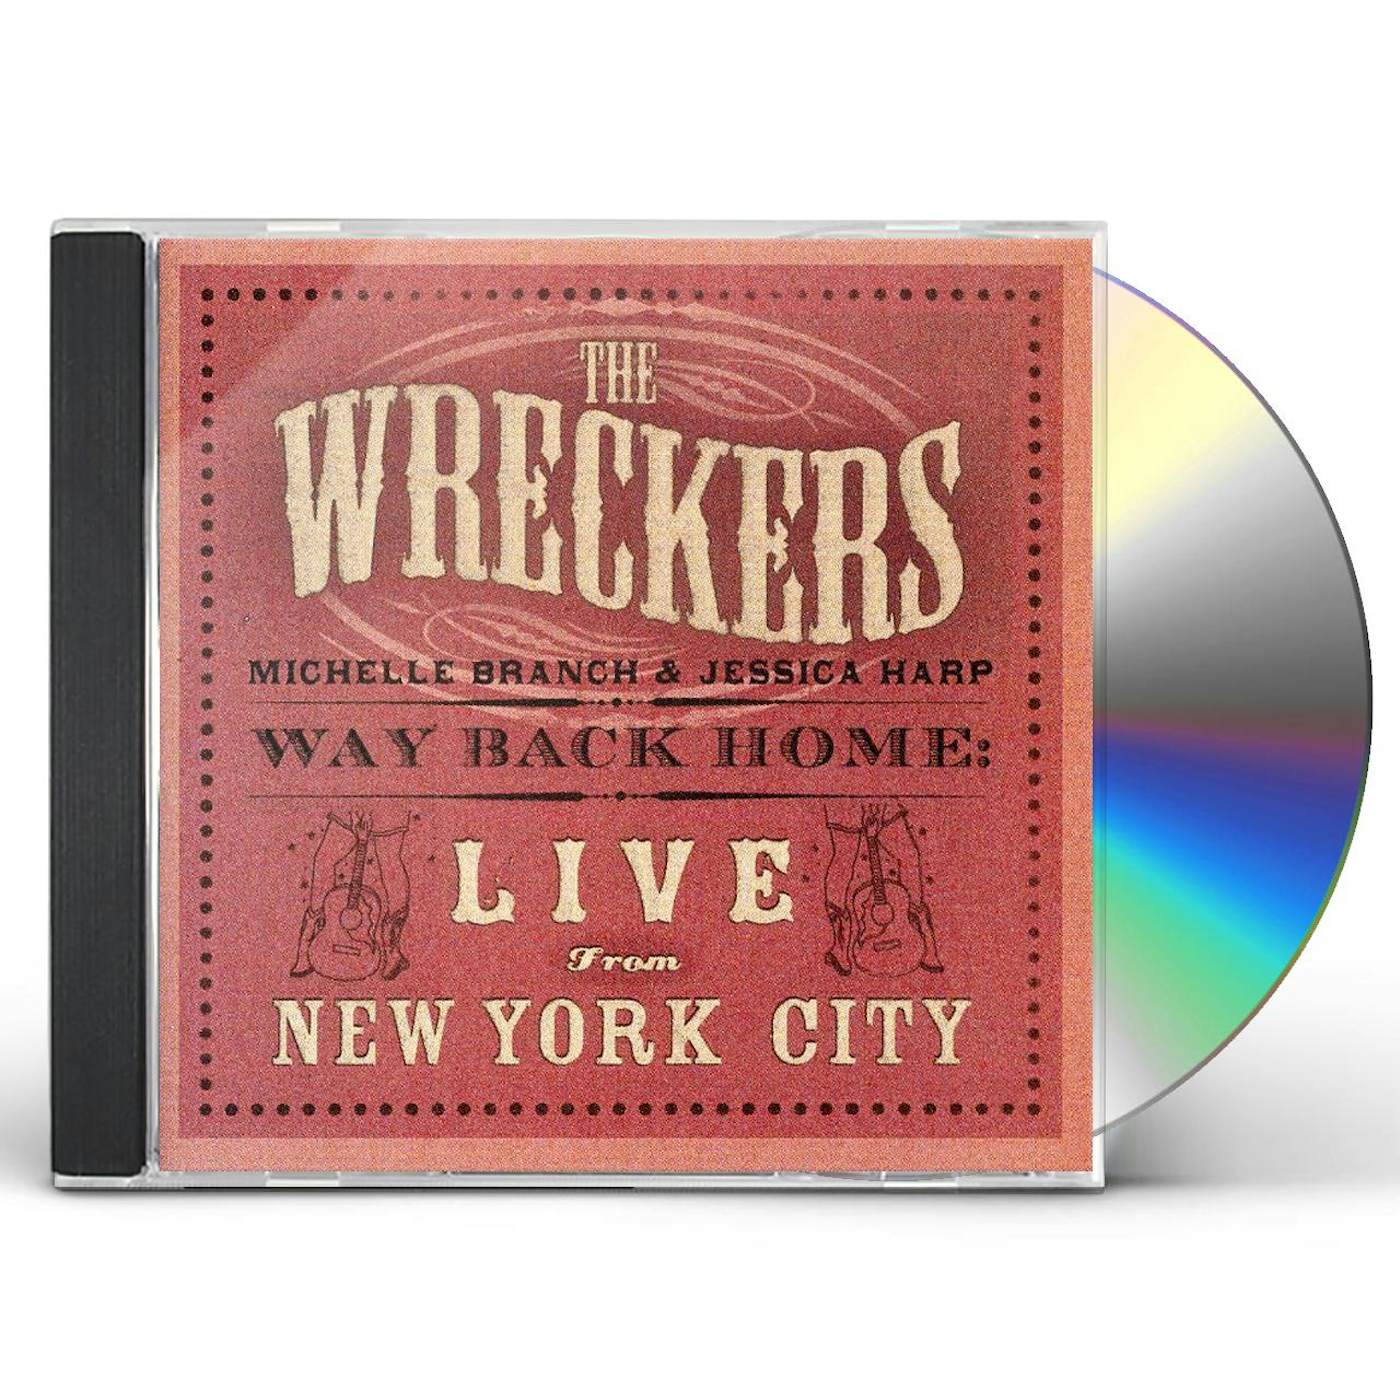 Wreckers WAY BACK HOME: LIVE FROM NEW YORK CITY CD